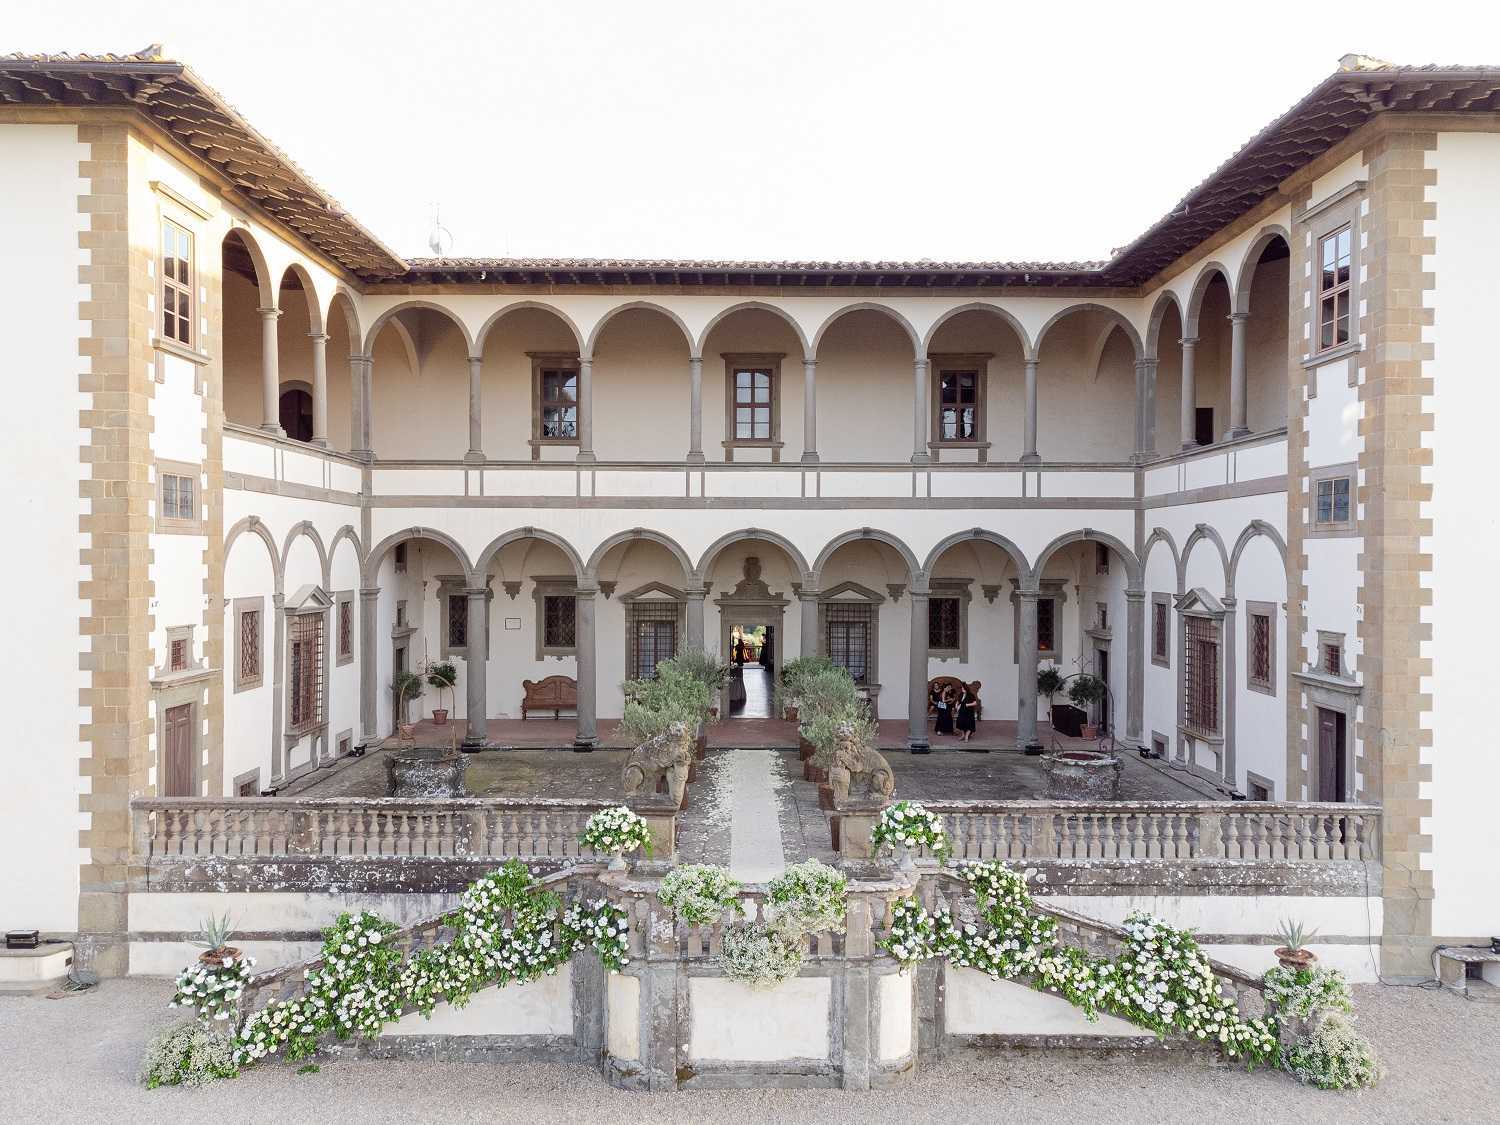 Villa I Collazzi: All You Need to Know BEFORE You Go (with Photos)